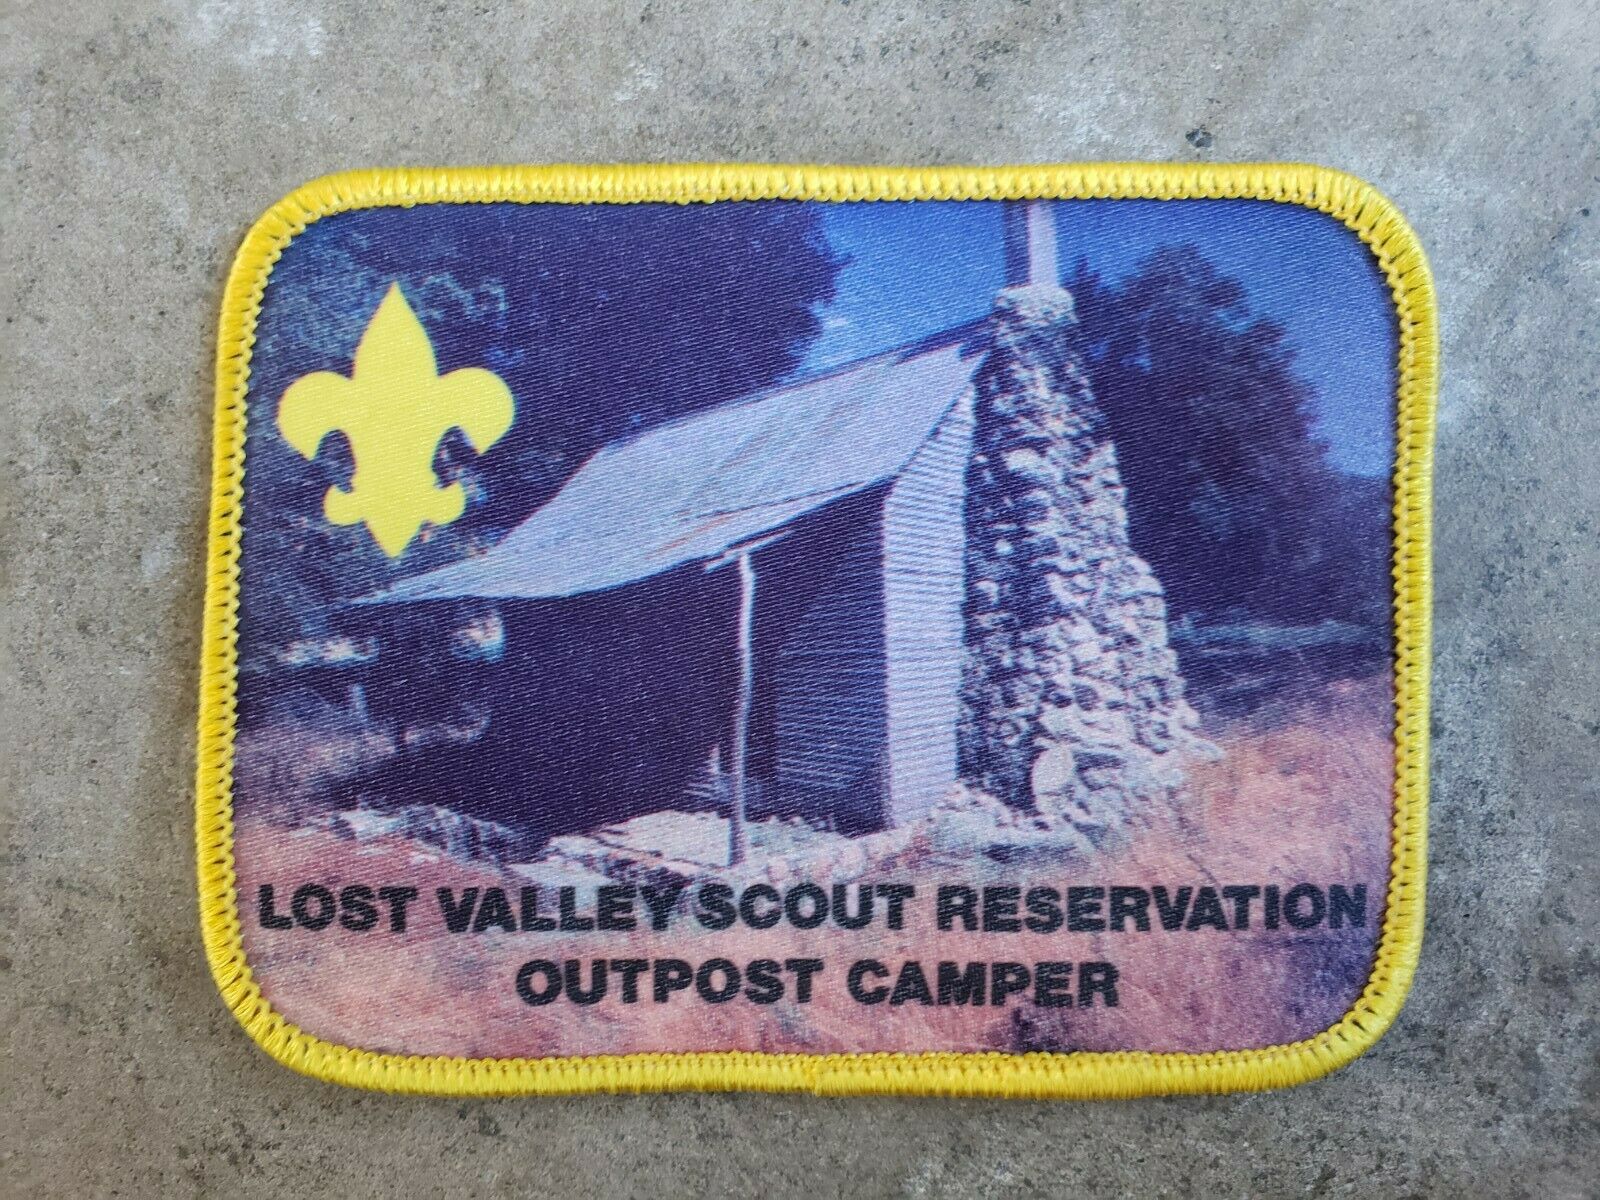 Orange County Council Lost Valley Scout Reservation Outpost Camper